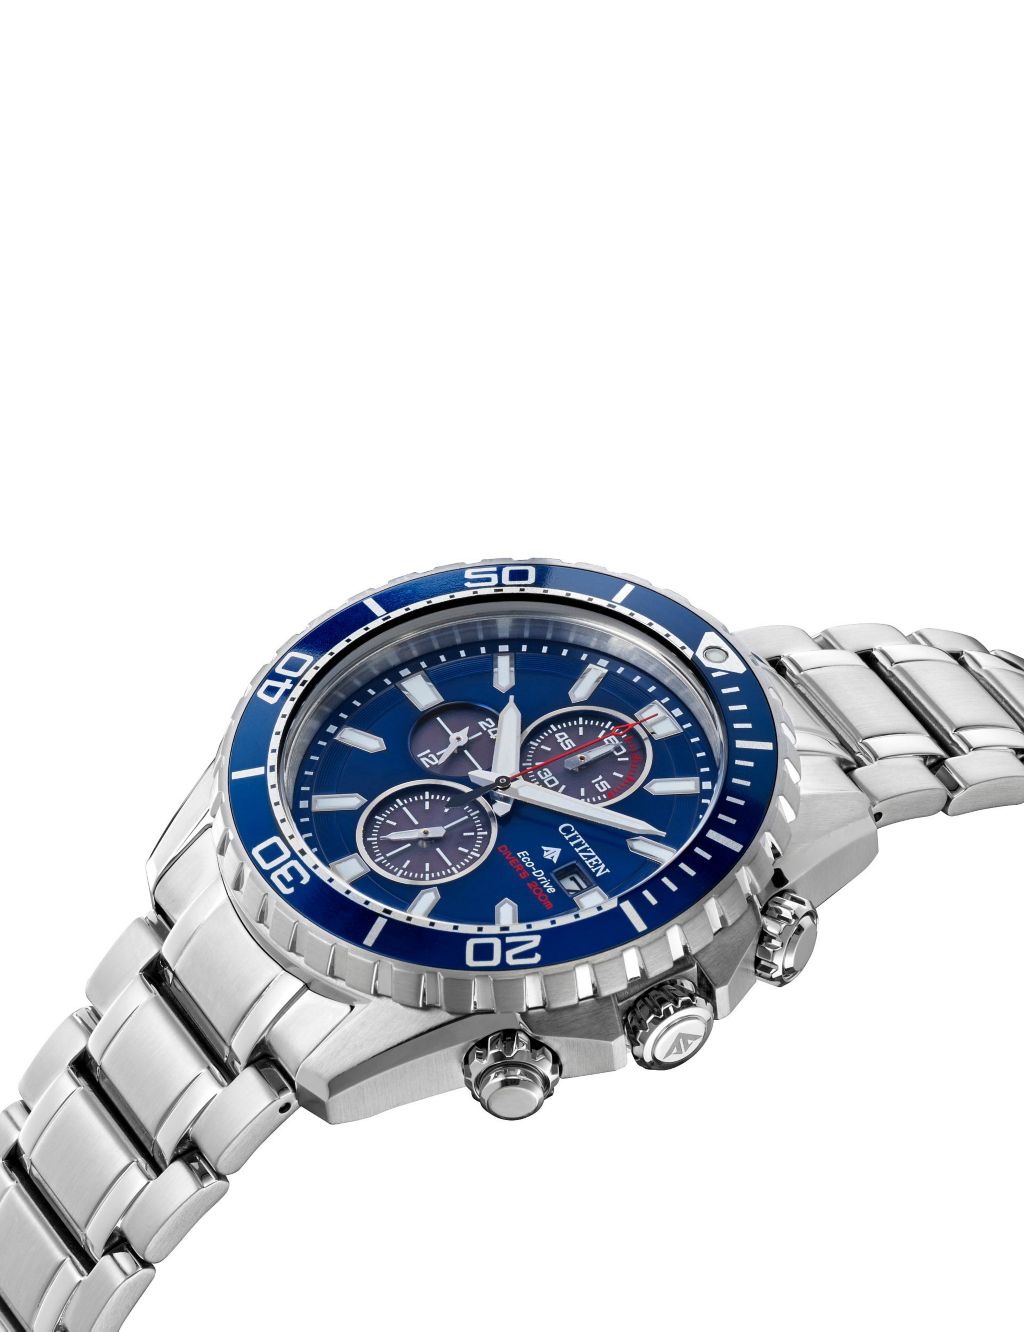 Citizen Promaster Diver's Stainless Steel Chronograph Watch image 4